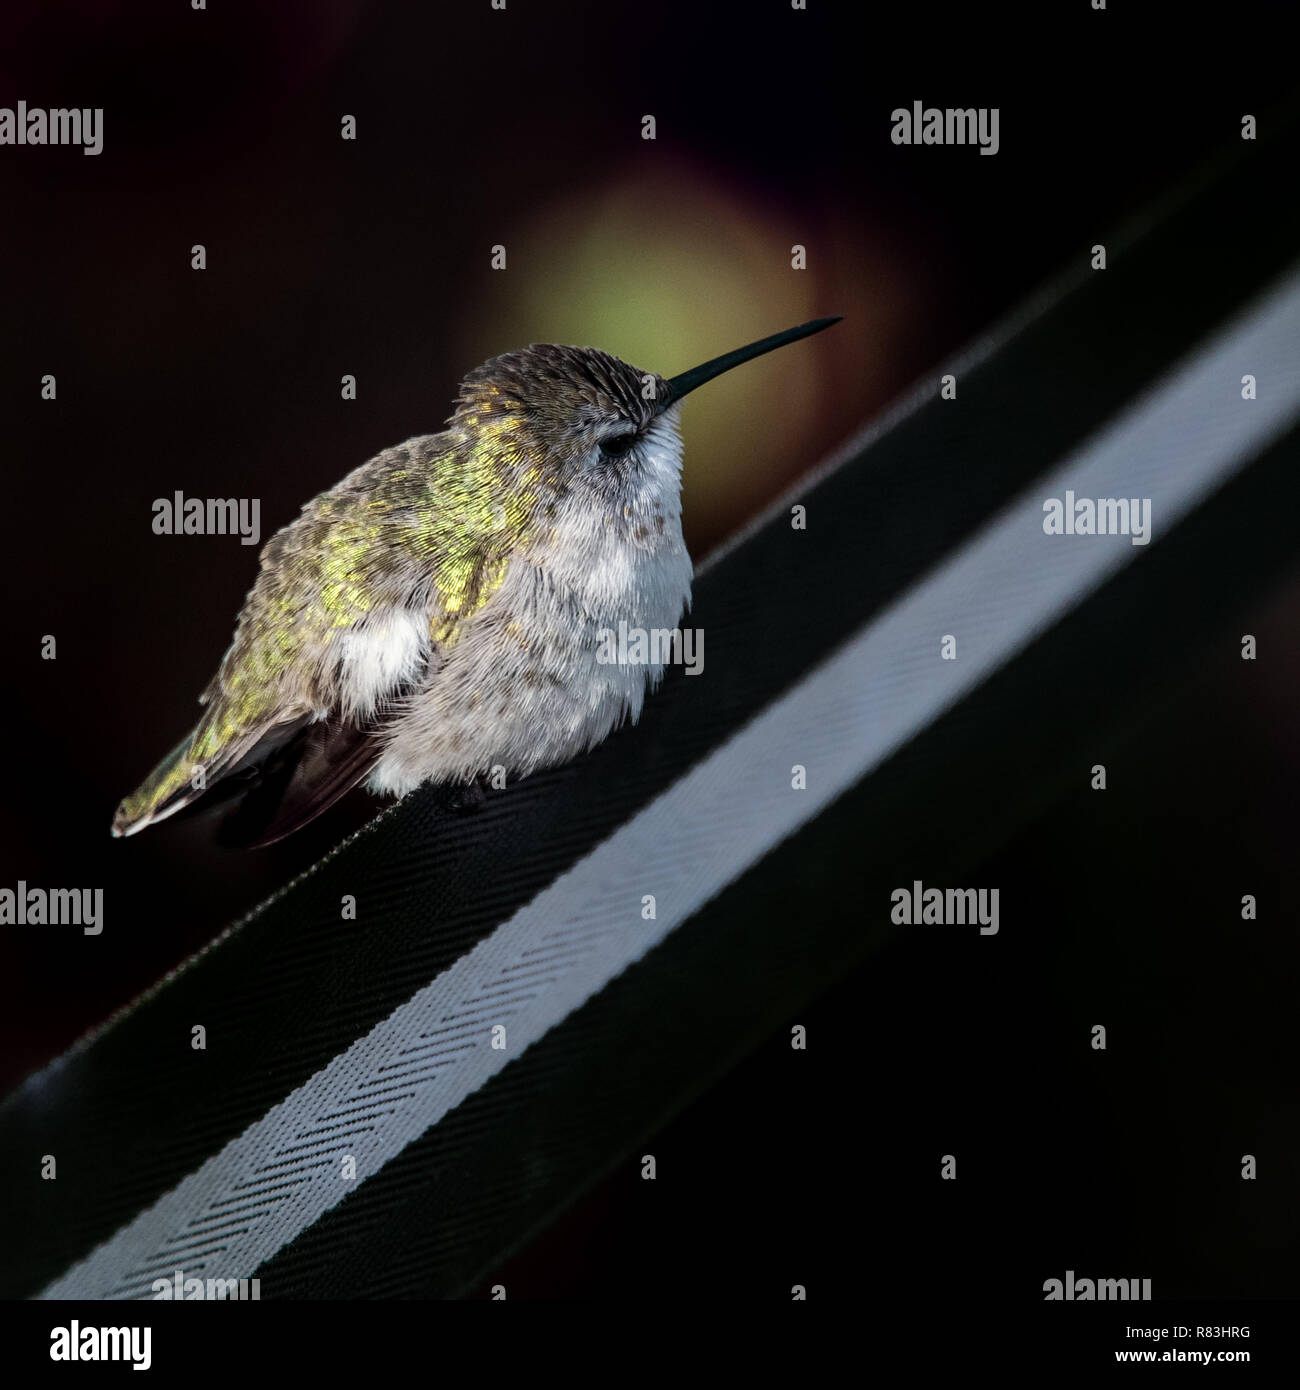 Female Hummingbird perched on Retractable Barrier Tape Stock Photo